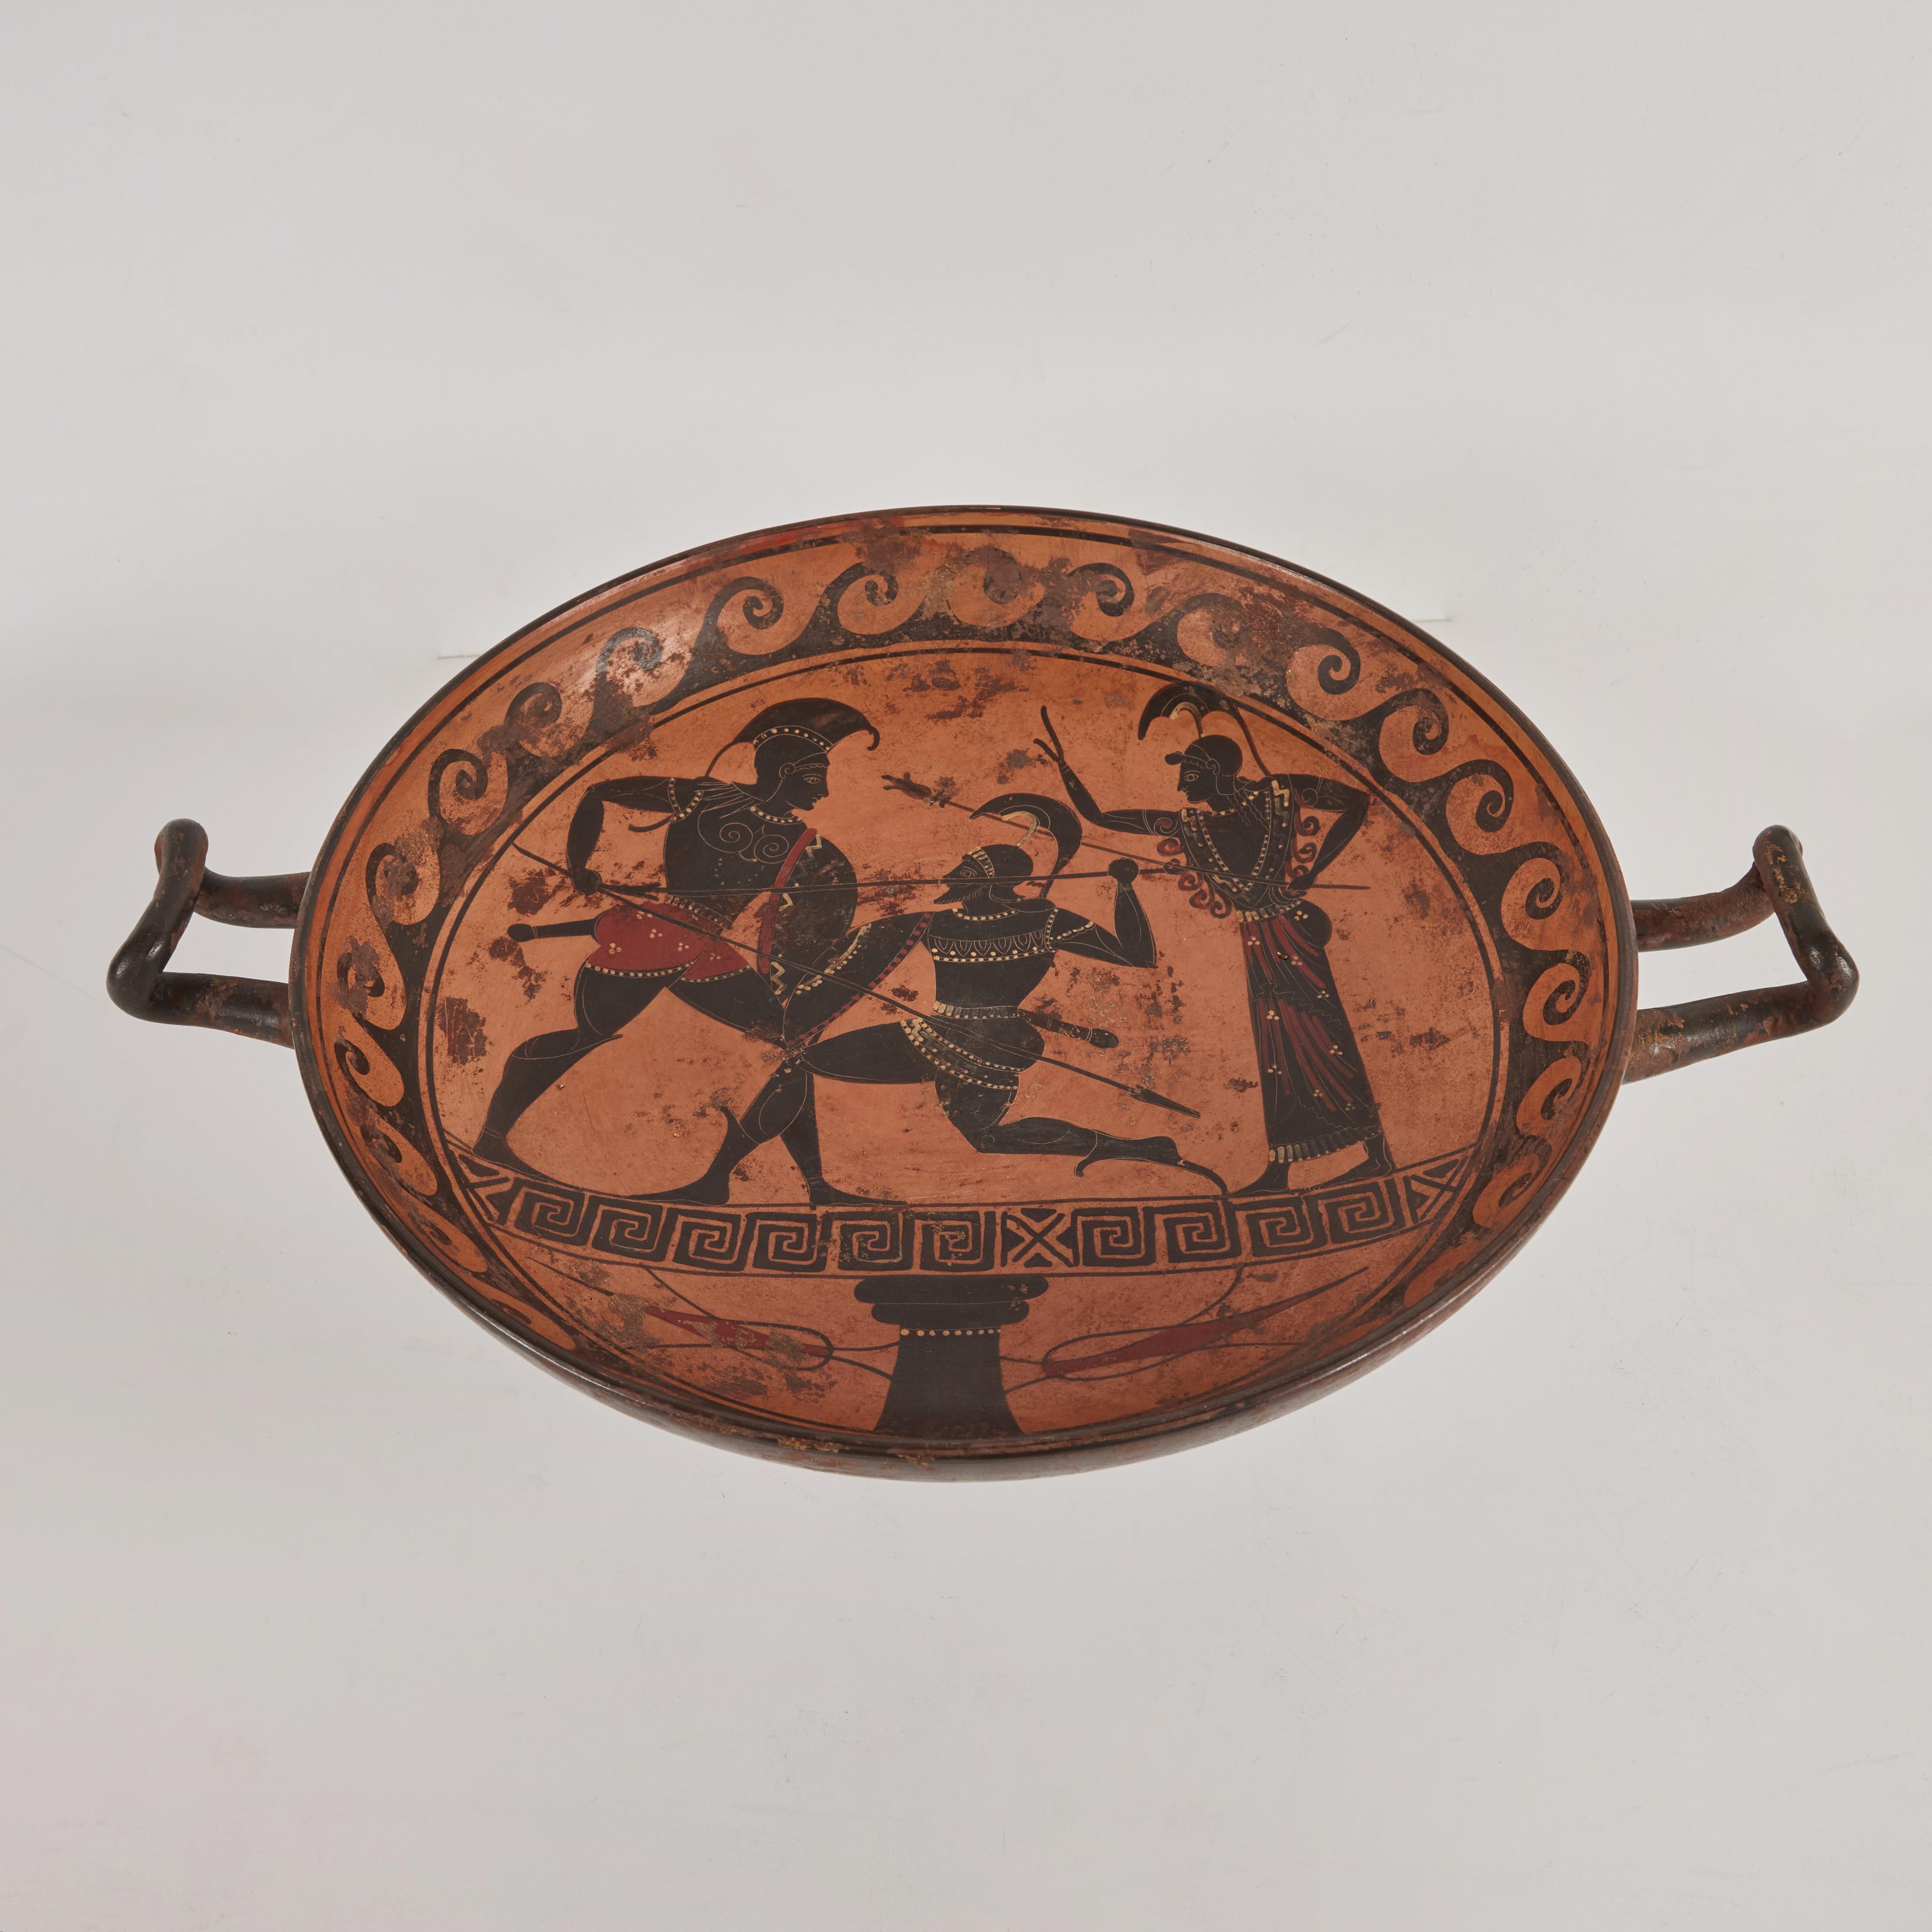 This Grand Tour terracotta drinking cup (kylix) is a later example of the elaborately painted vessels used during symposia in ancient Greece. The broad, shallow bowl with two handles atop a pedestal base permitted the drinker to maintain a recumbent